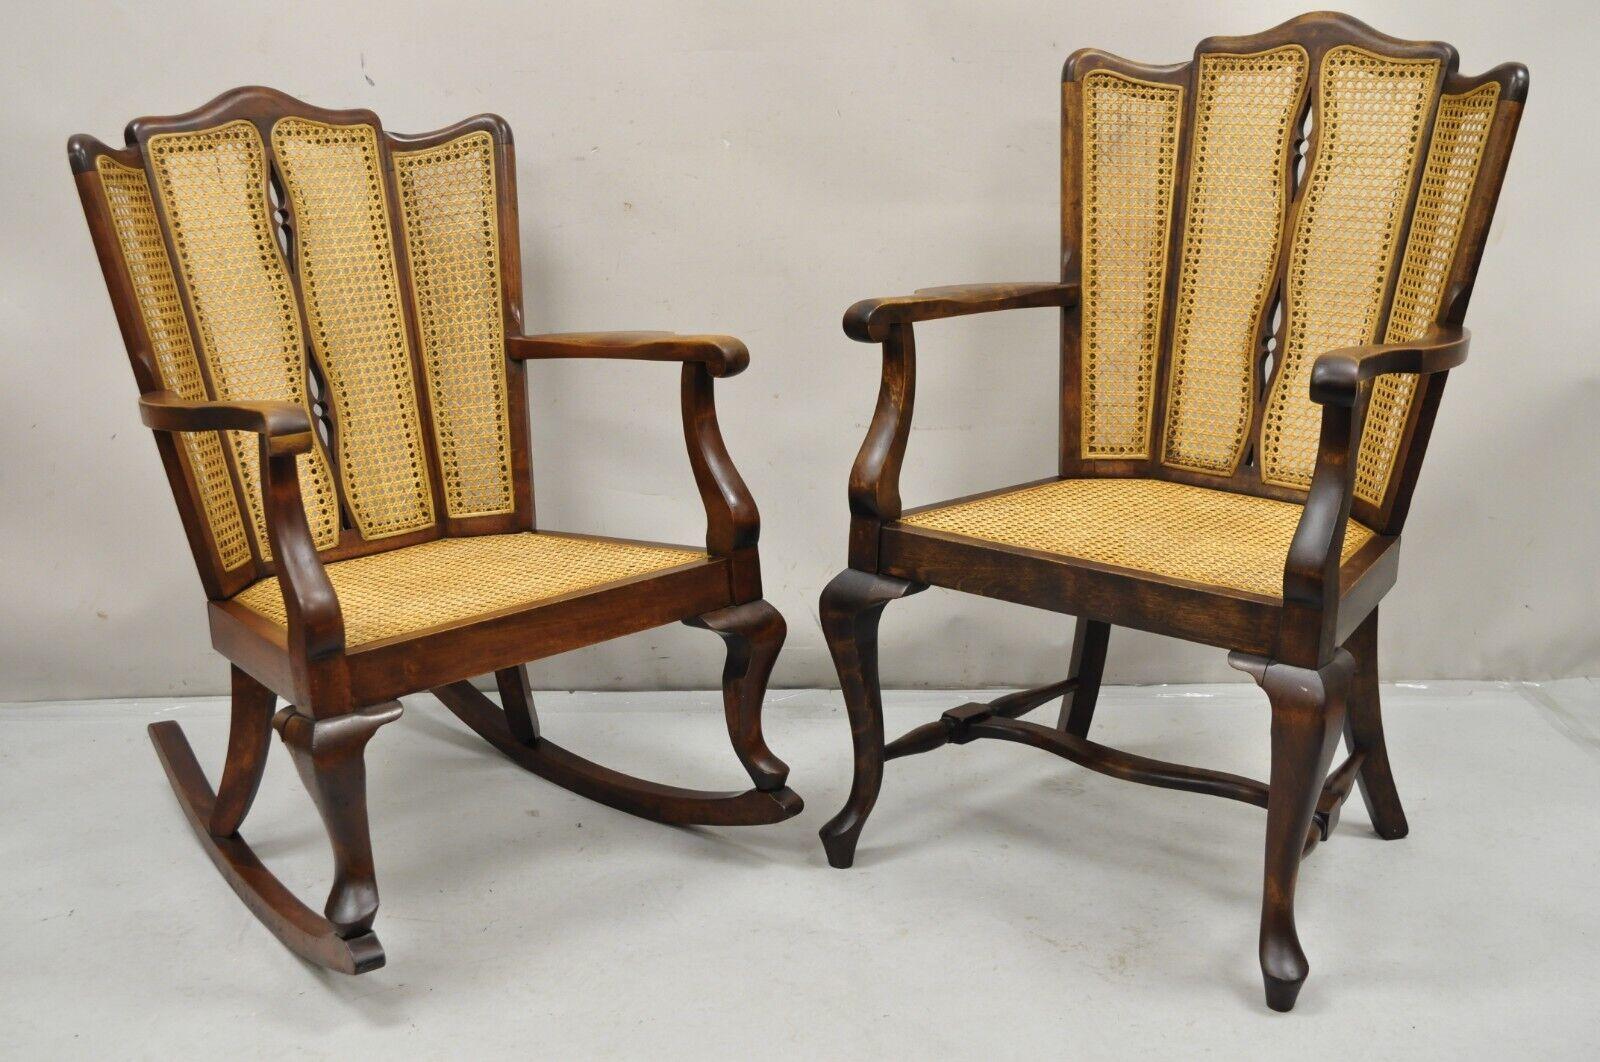 Antique Victorian Walnut and Cane Carved Rocker Rocking Chair Queen Anne Legs For Sale 3